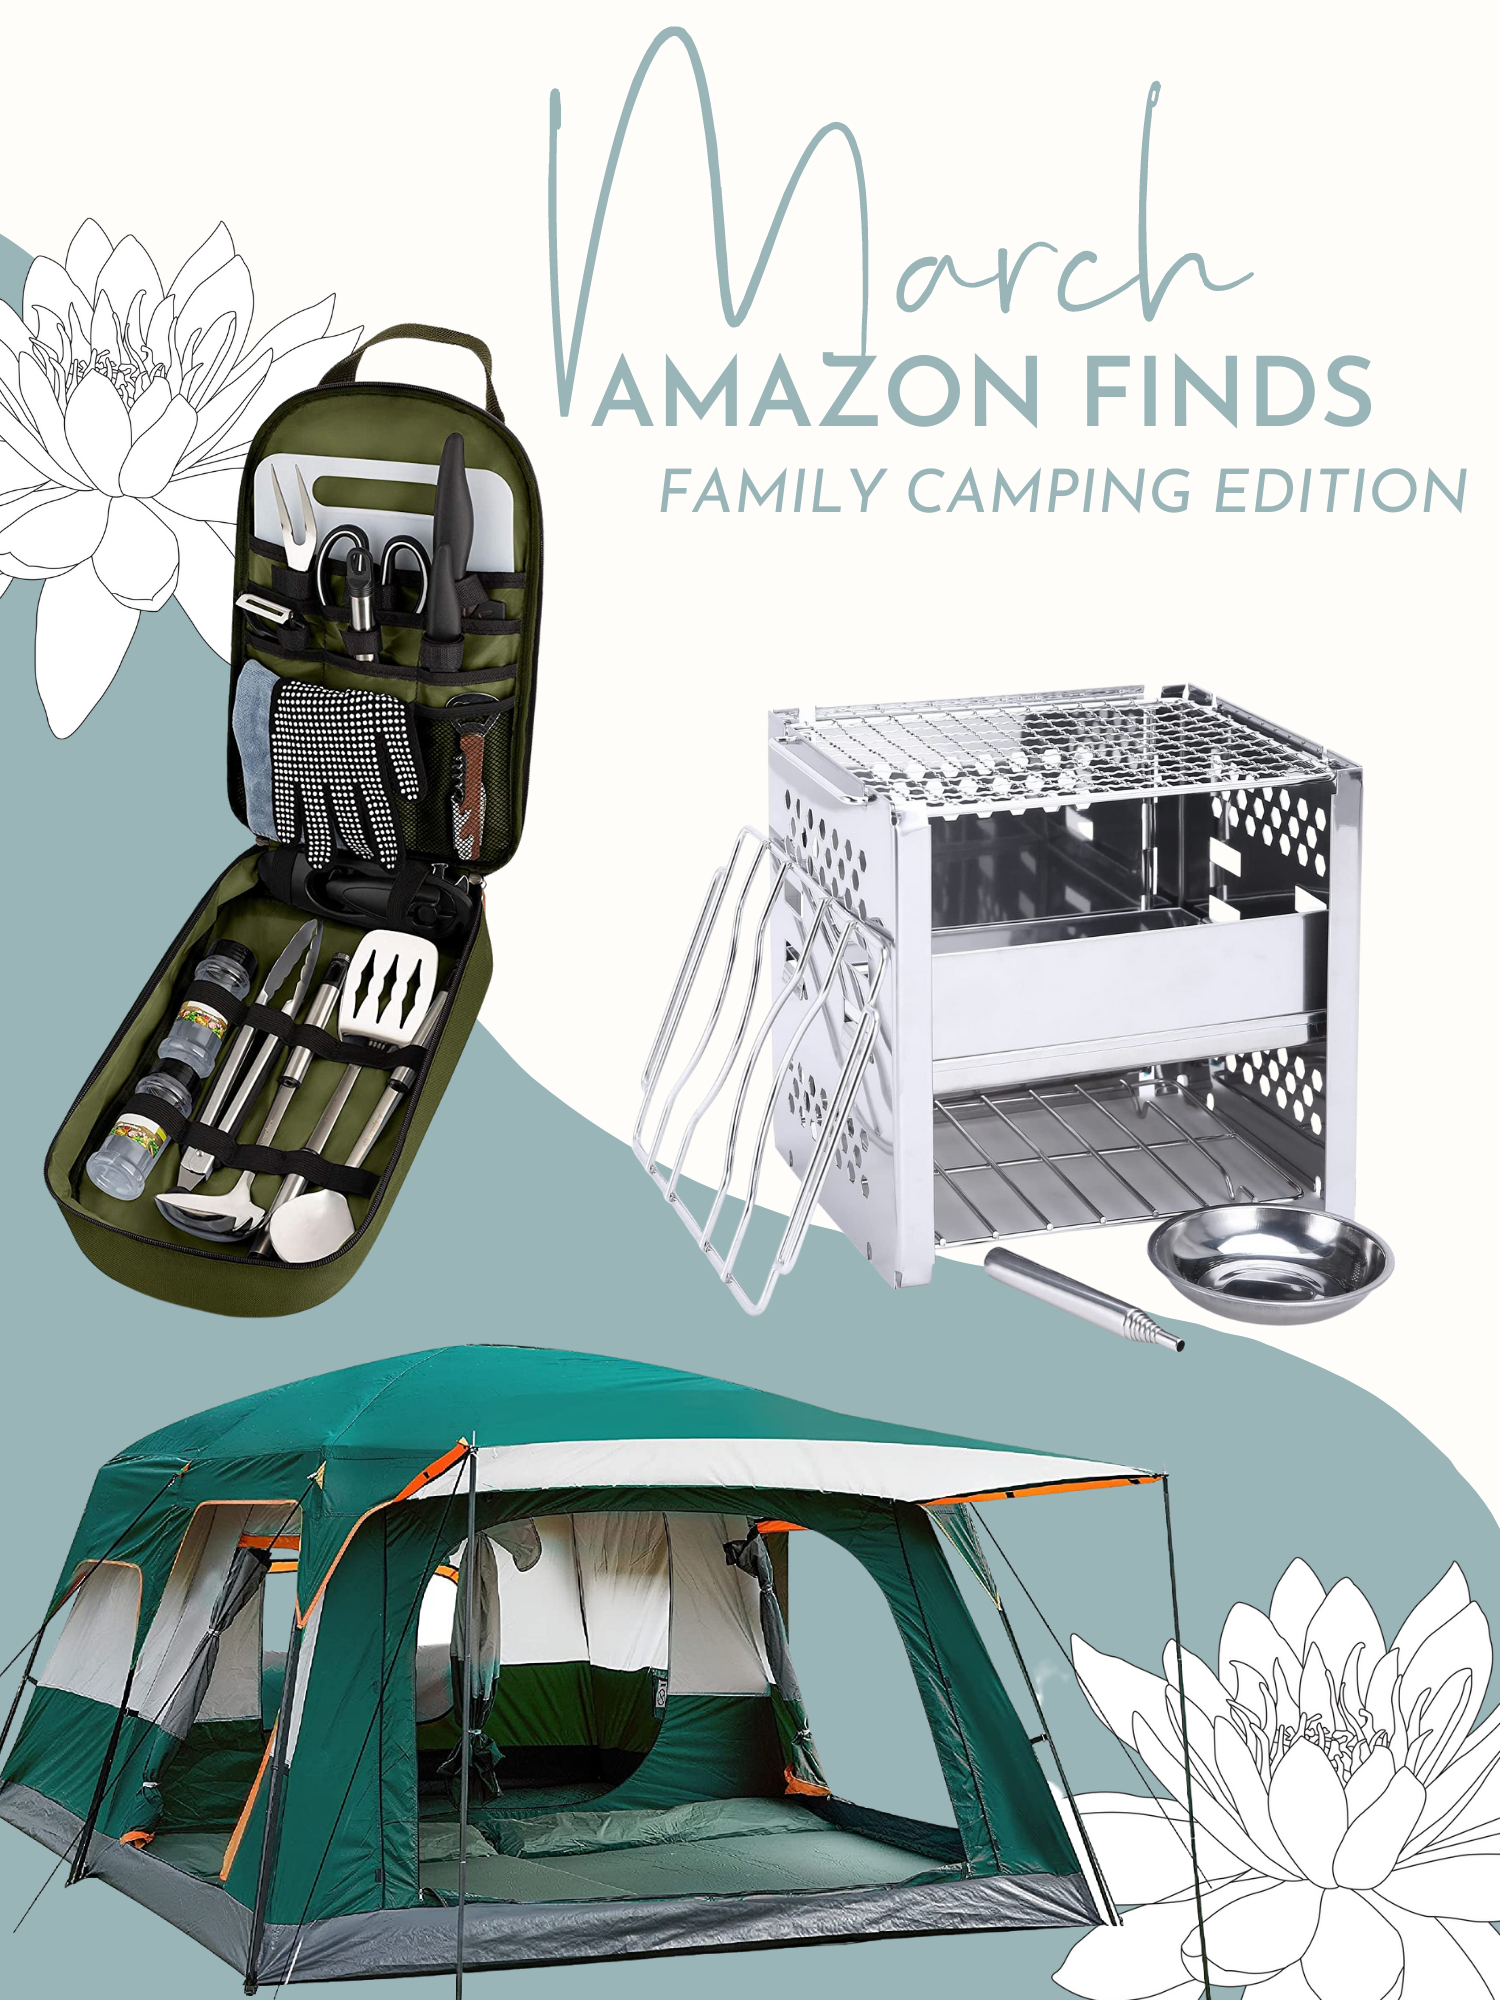 Amazon Finds camping gear